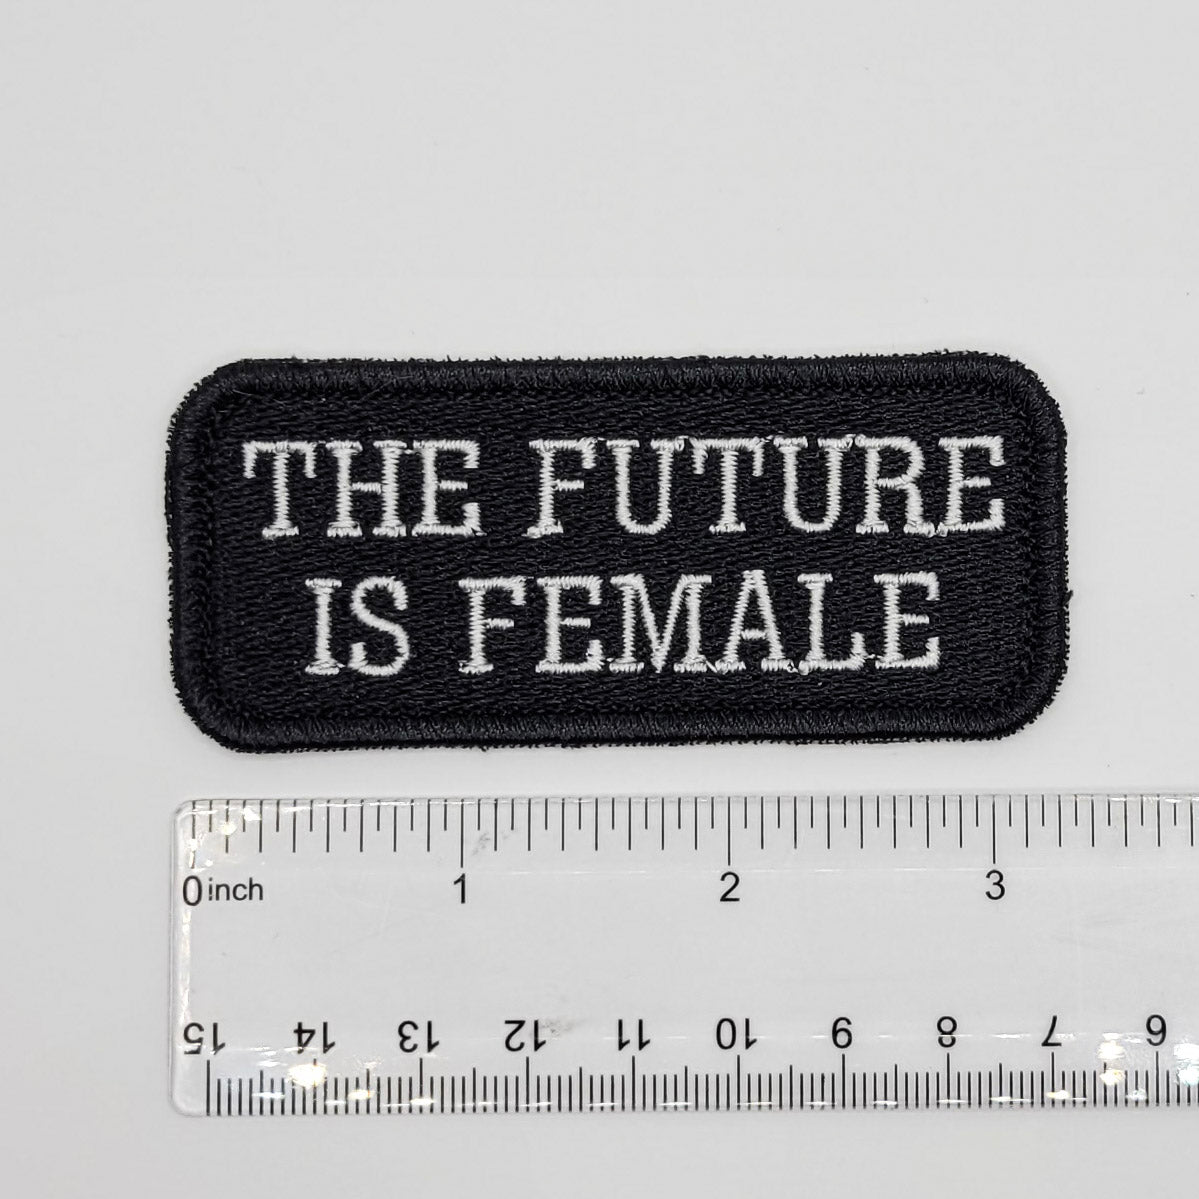 The Future is Female Embroidered Patch